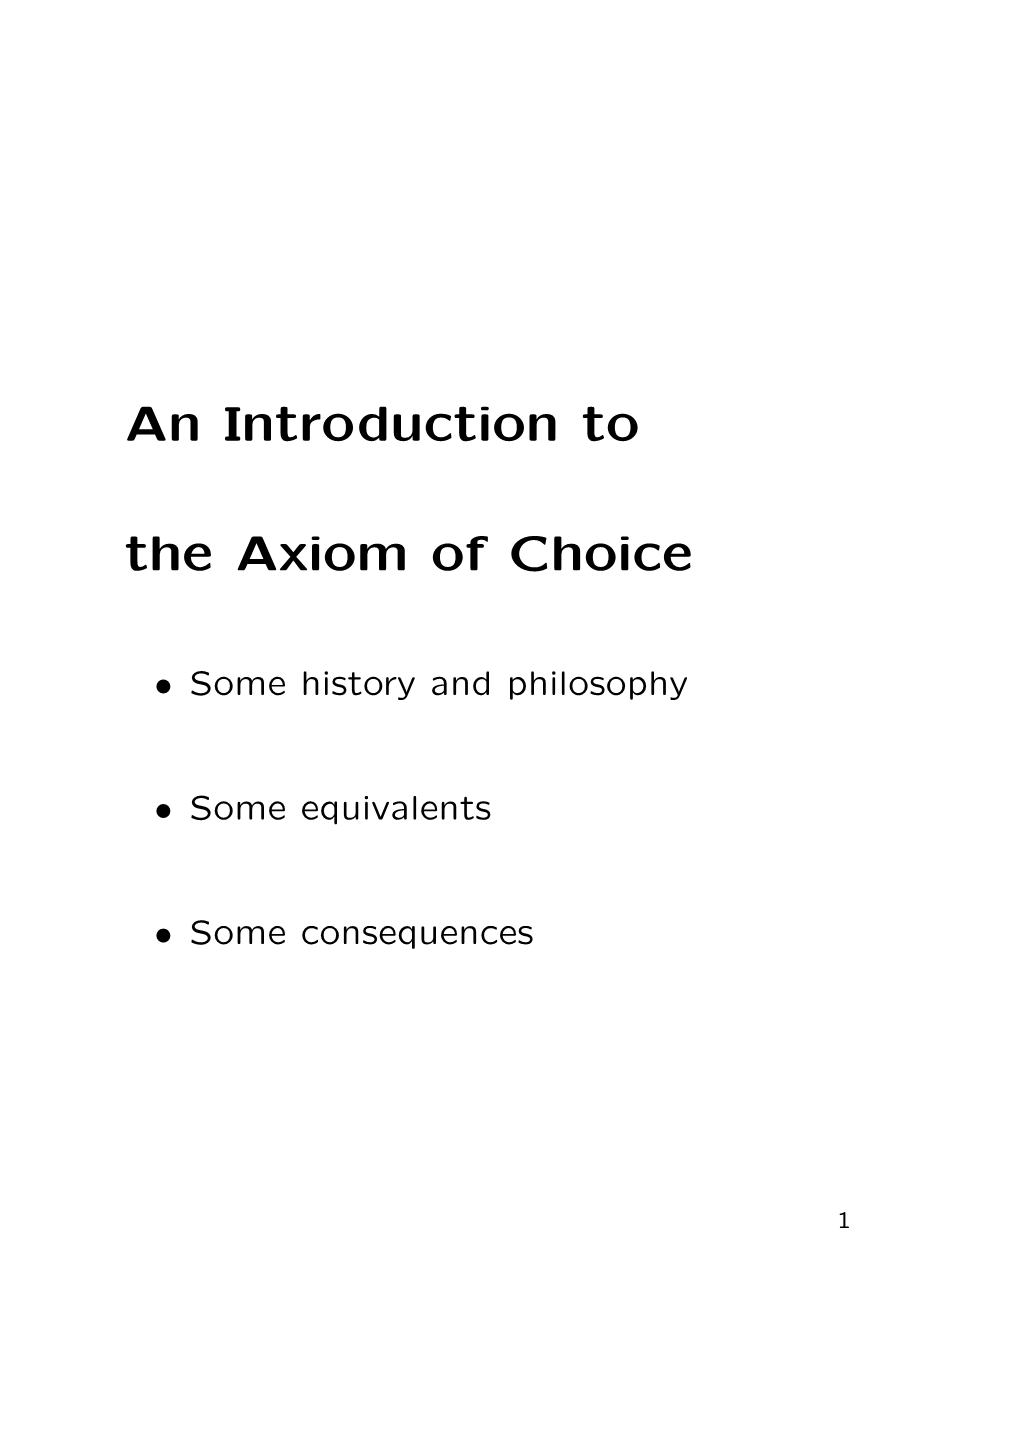 An Introduction to the Axiom of Choice